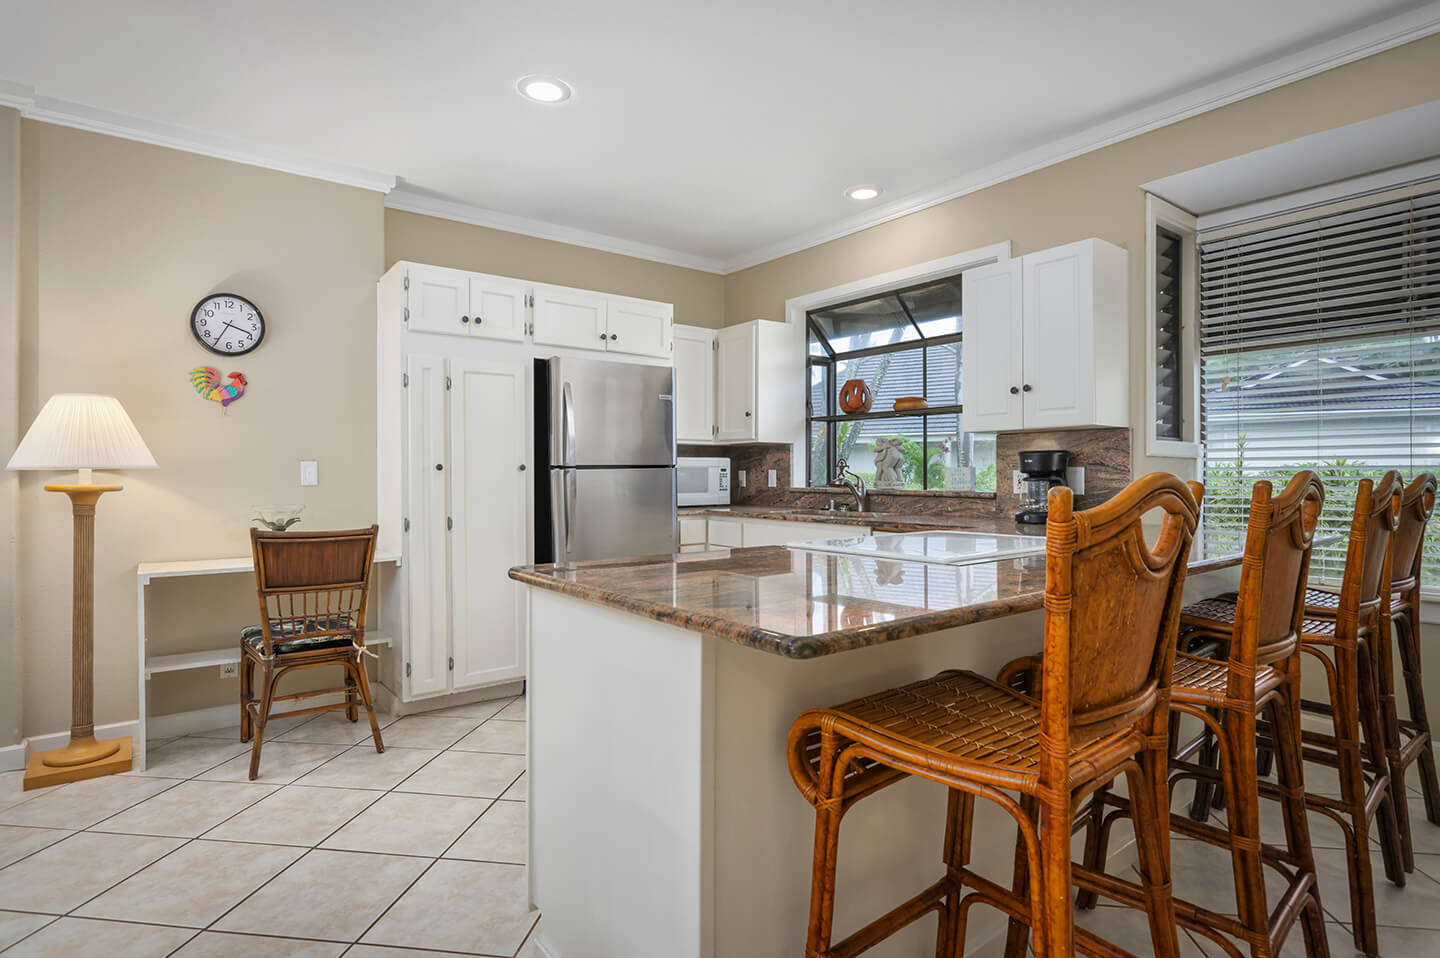 Kitchen counter top with seating